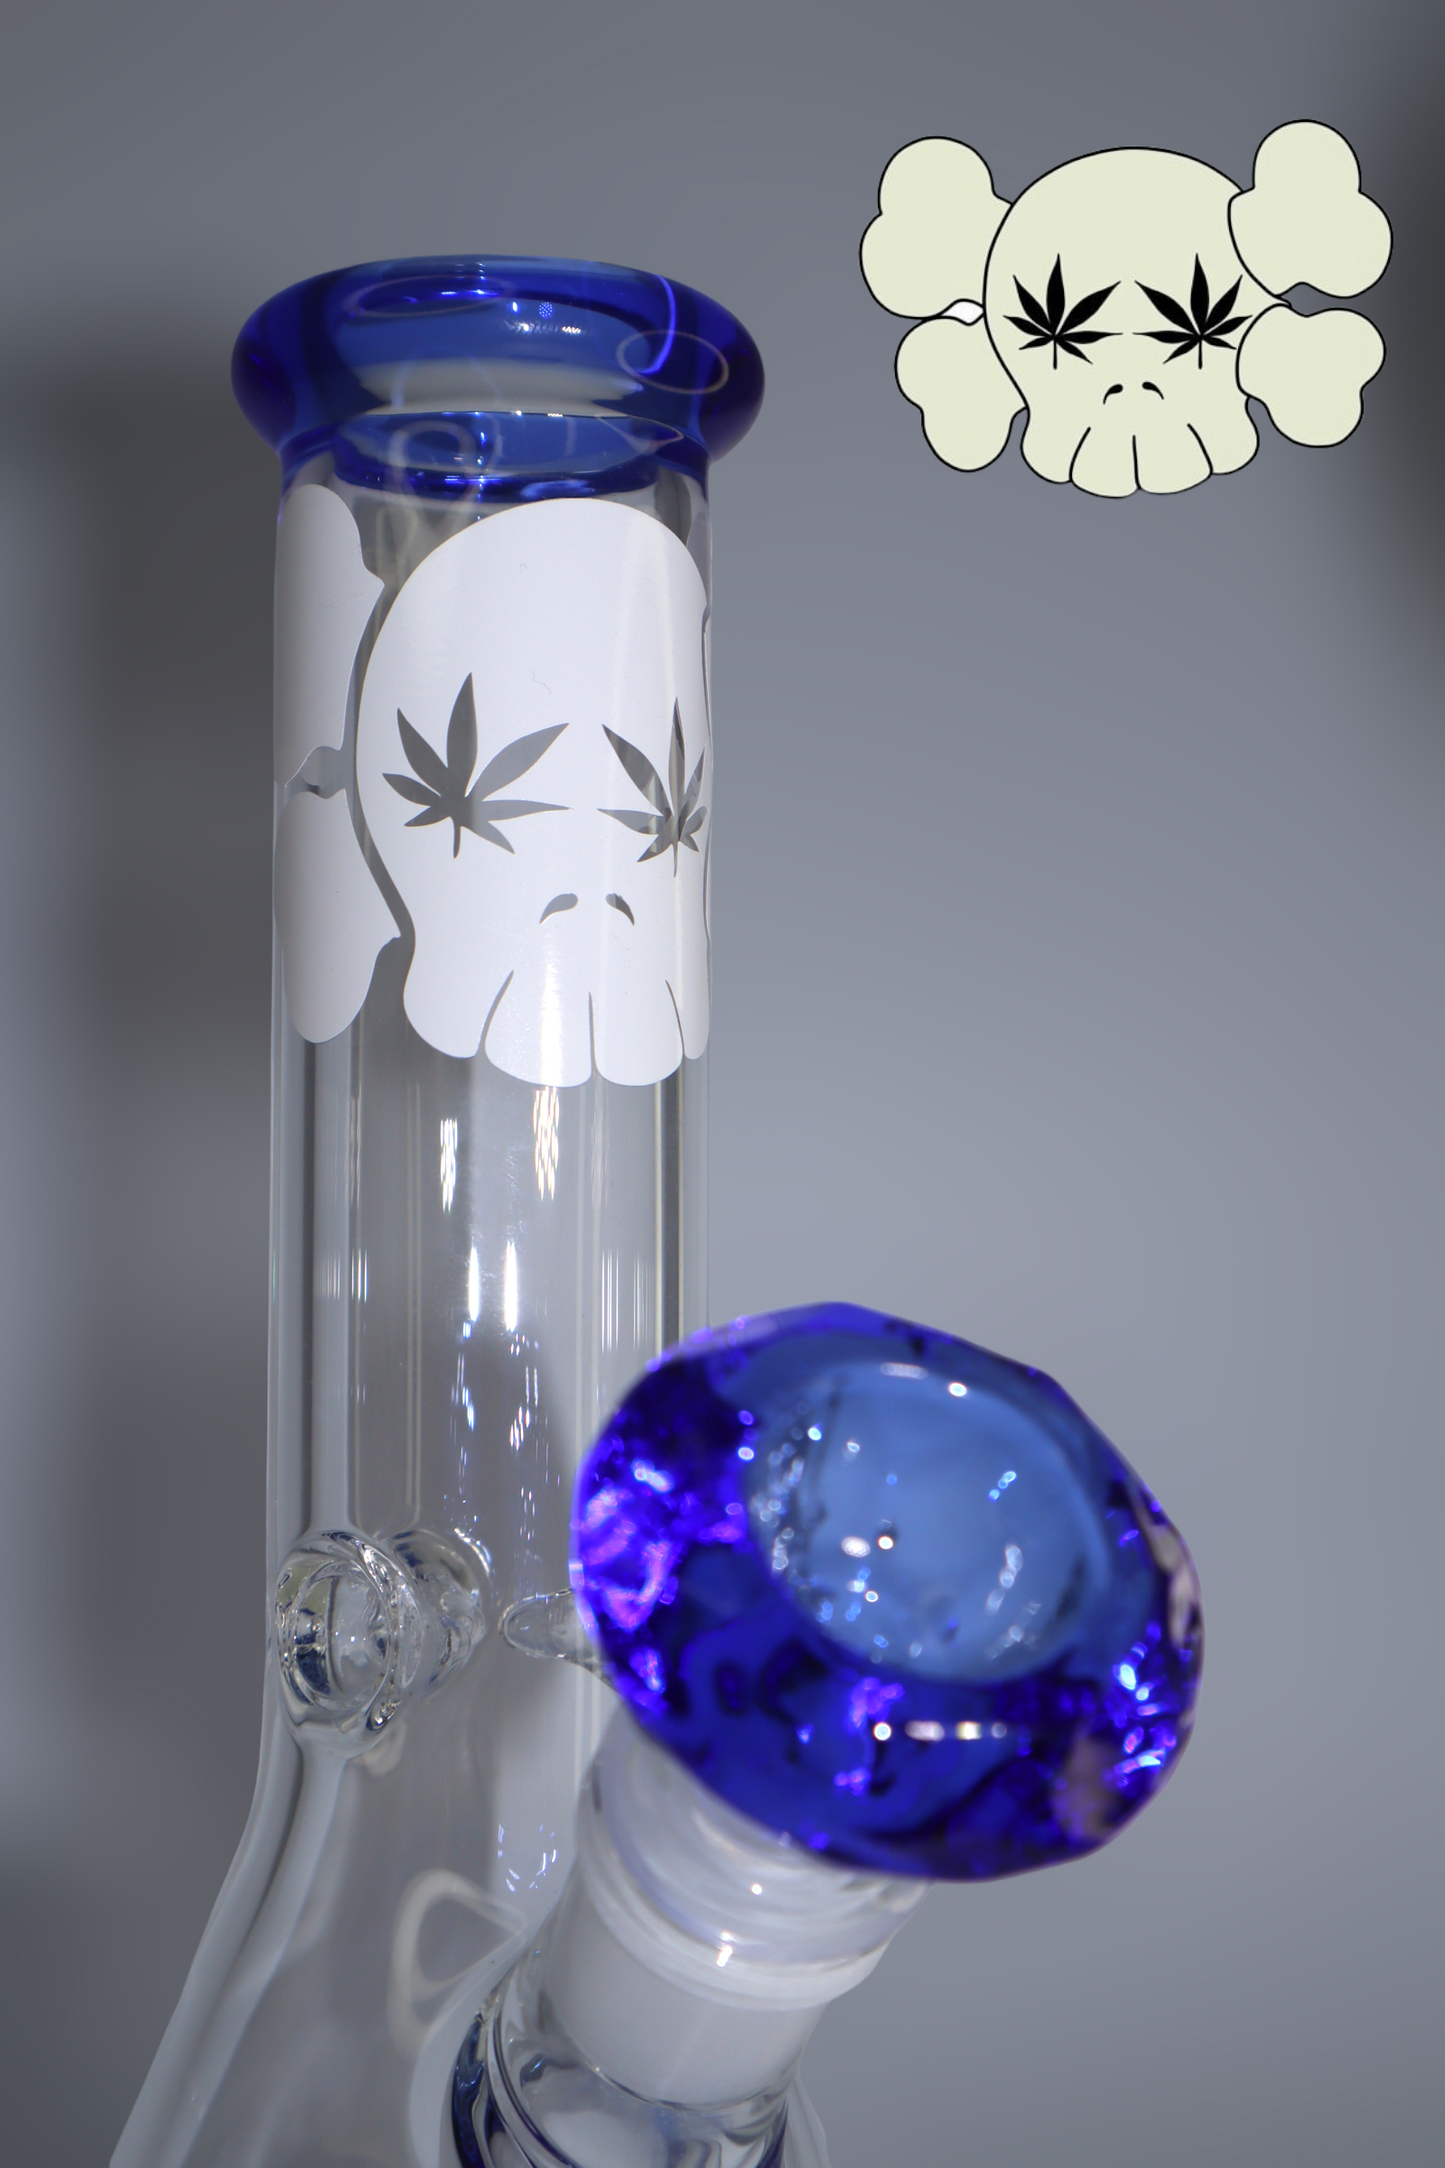 BrokeBois - Stoned to the Dome Beaker Bong